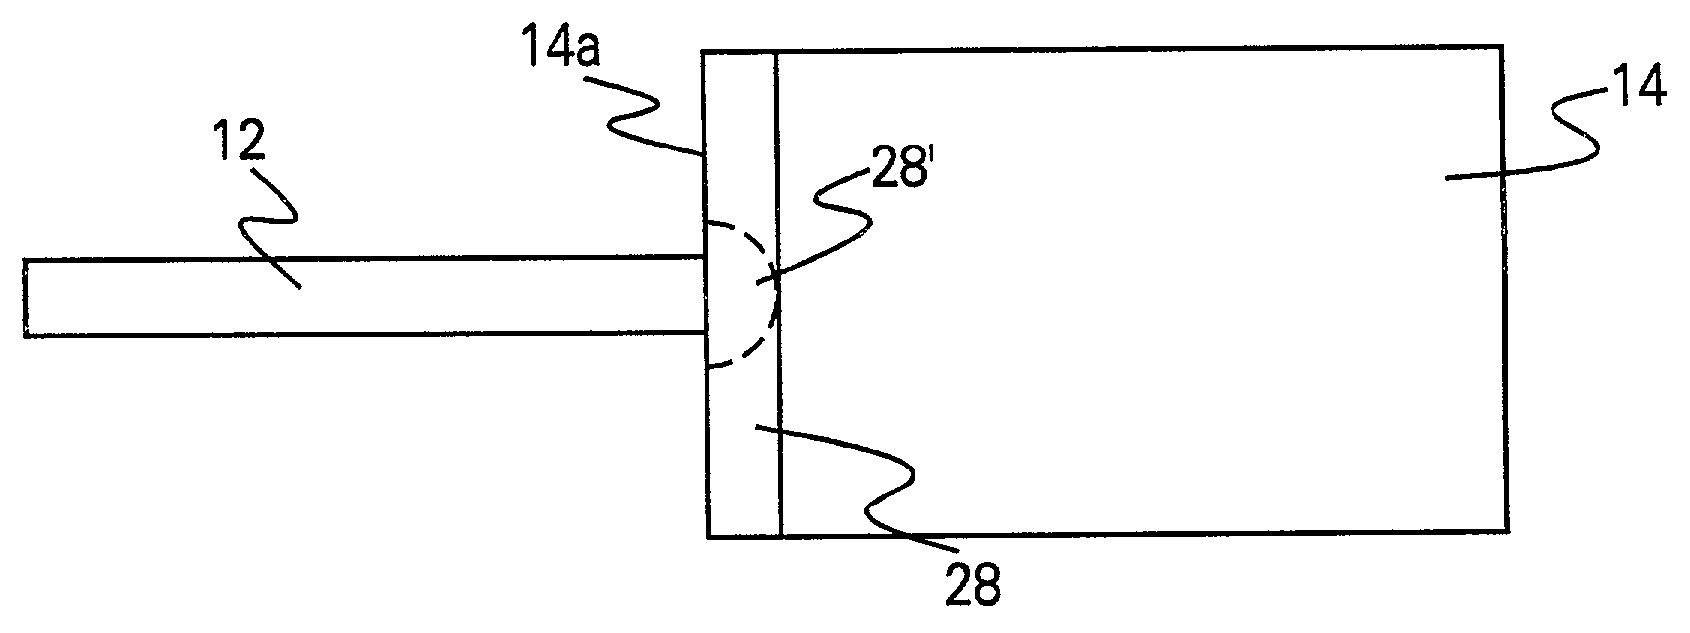 Fabrication of collimators employing optical fibers fusion-spliced to optical elements of substantially larger cross-sectional areas